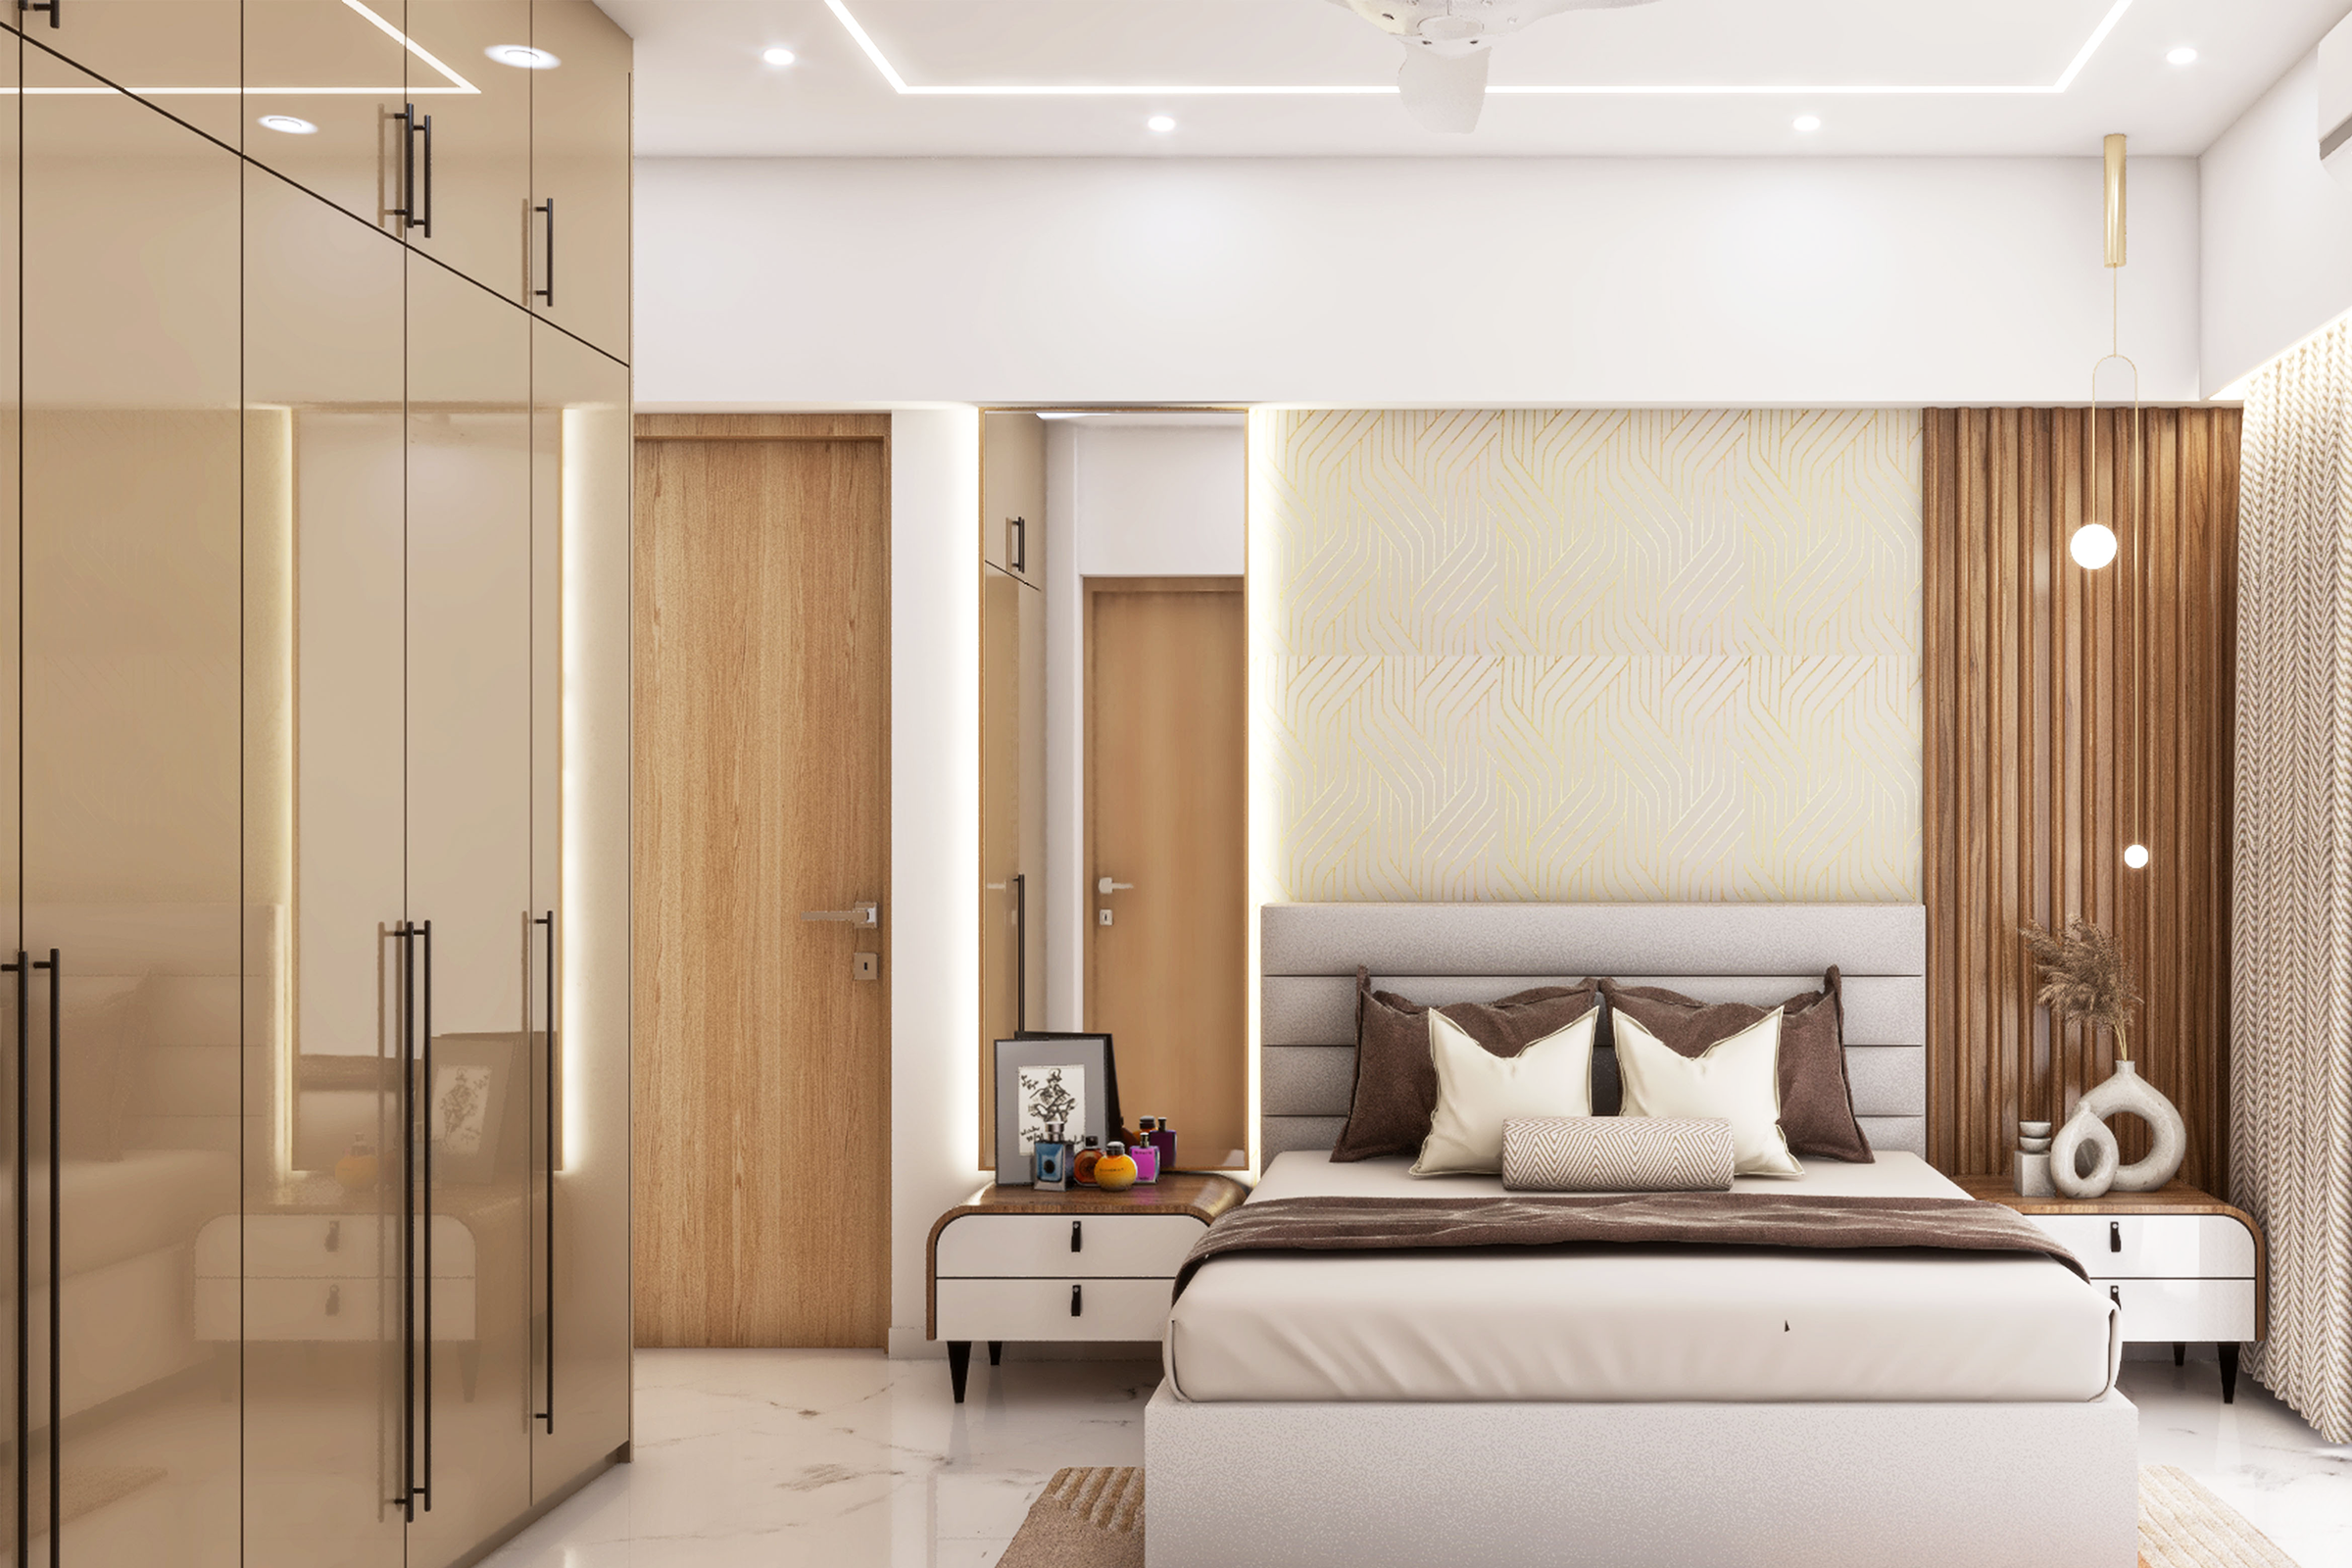 Contemporary Master Bedroom Design With False Ceiling